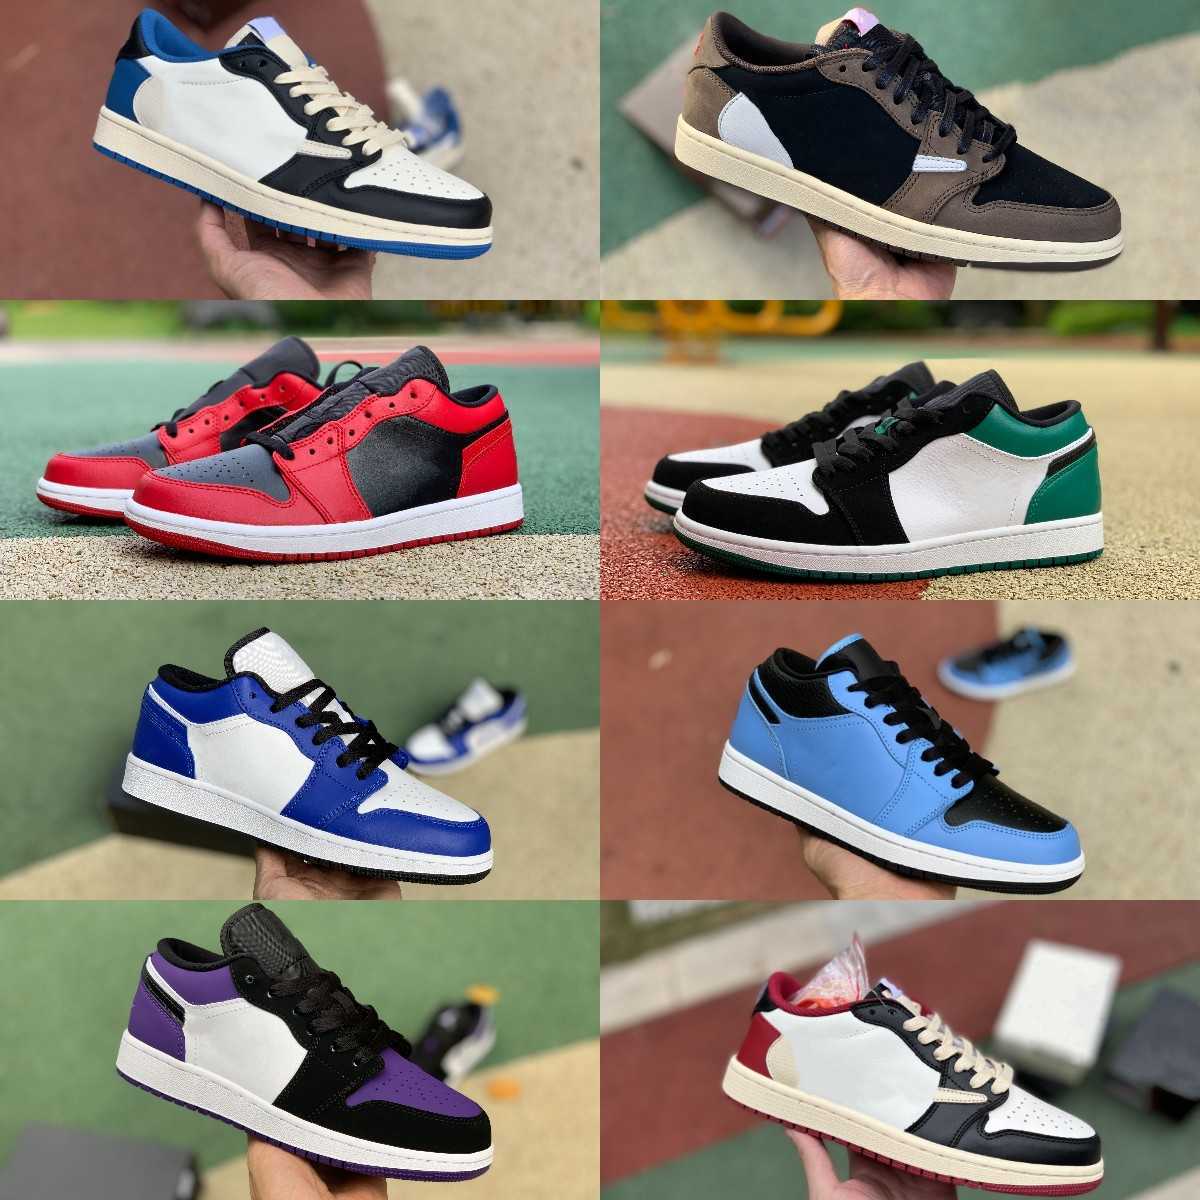 

2022 Fragment TS Jumpman X 1 1S Low Basketball Shoes White Brown Red Gold Banned UNC Court Purple Black Toe Shadow Panda Emerald Crimson Tint Designer Sports Sneakers, Please contact us